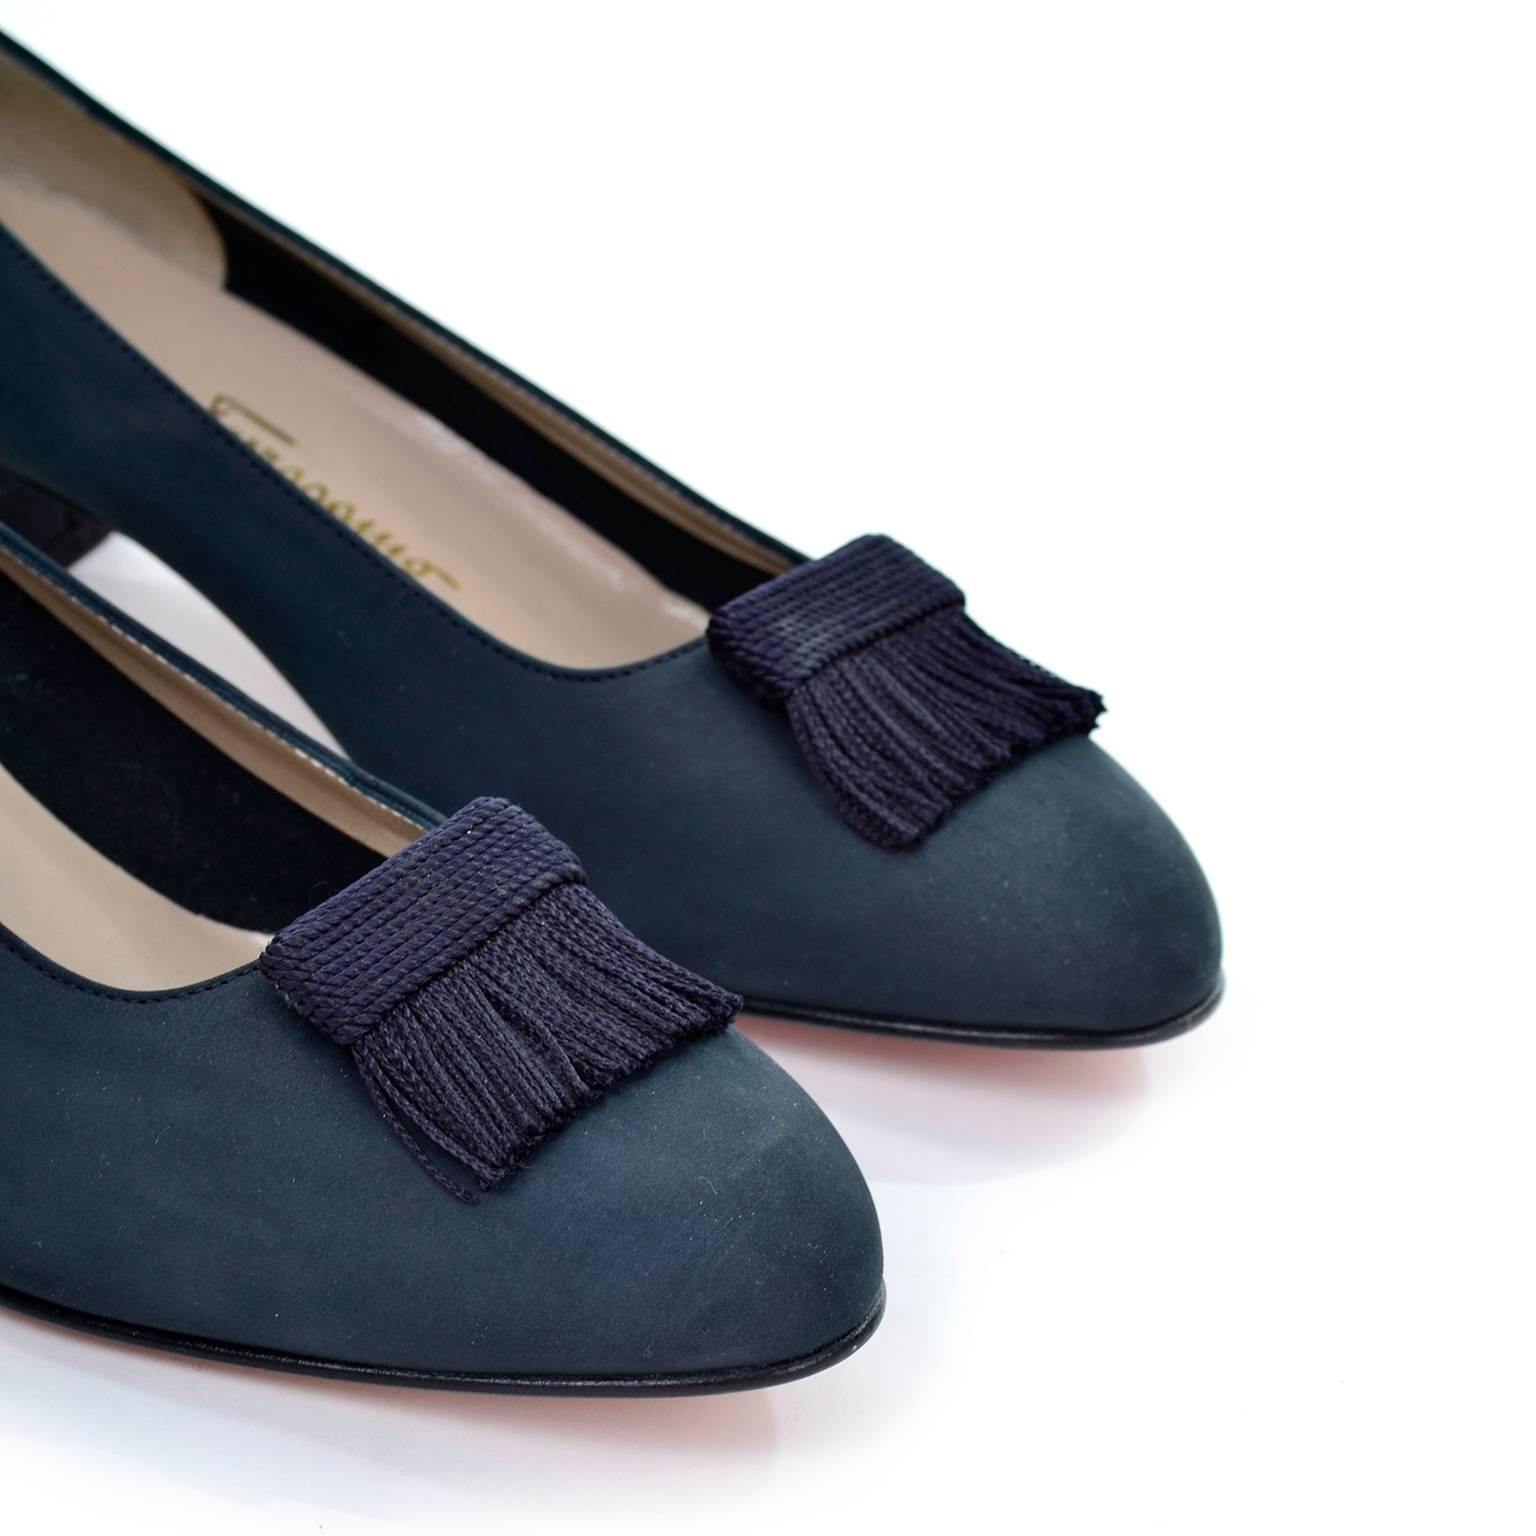 These Vintage Ferragamo shoes have never been worn!  Salvatore Ferragamo Boutique navy blue suede slip on shoes with a large woven silk or rayon fringed tassels on uppers wth rounded toes. These loafer-like shoes have a short block heel and were